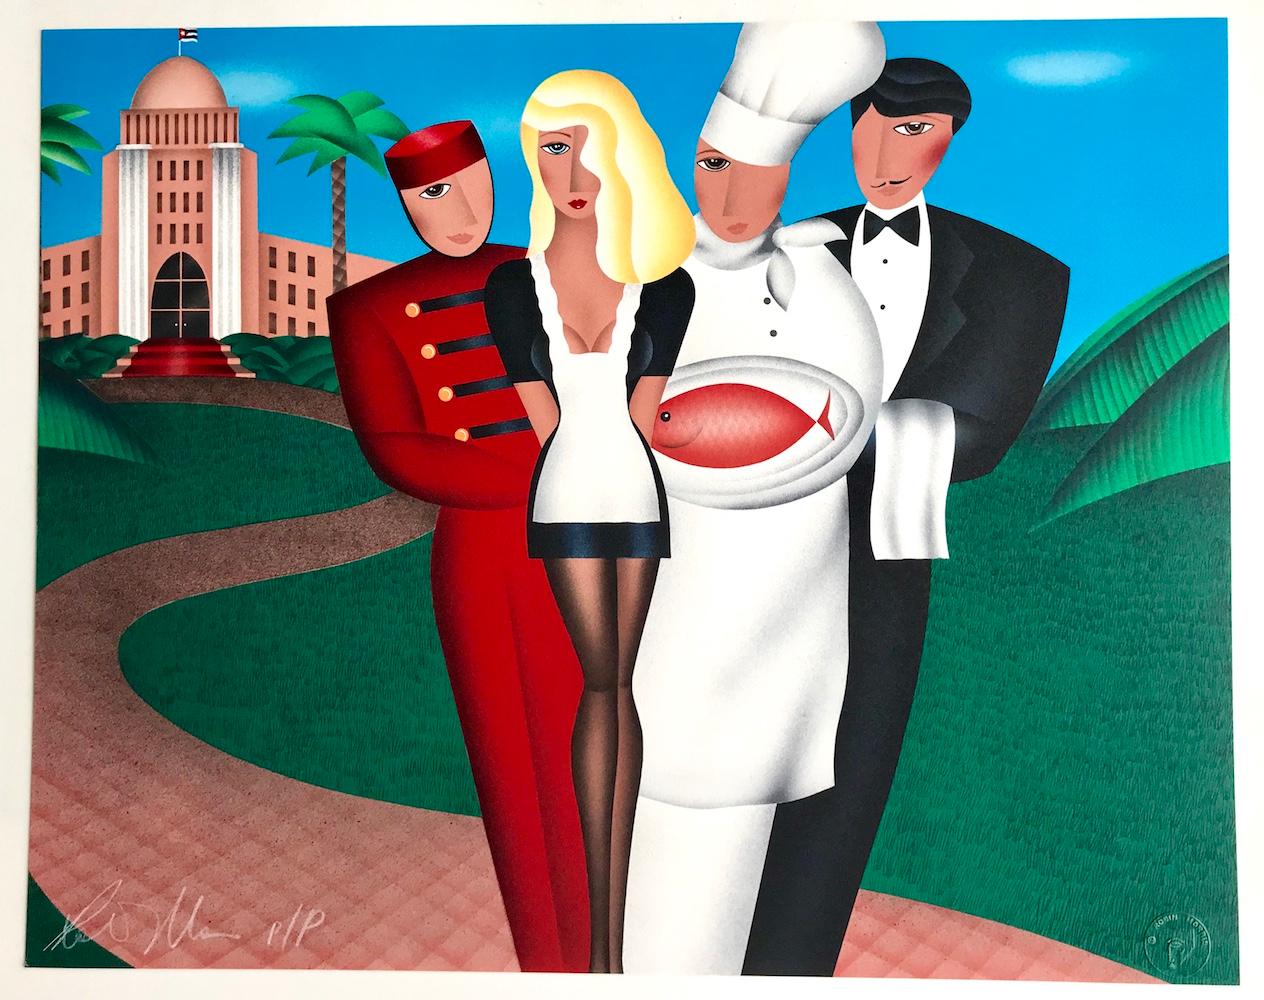 AT YOUR SERVICE Signed Lithograph, Hotel Hospitality, Waiter, Chef - Blue Portrait Print by Robin Morris